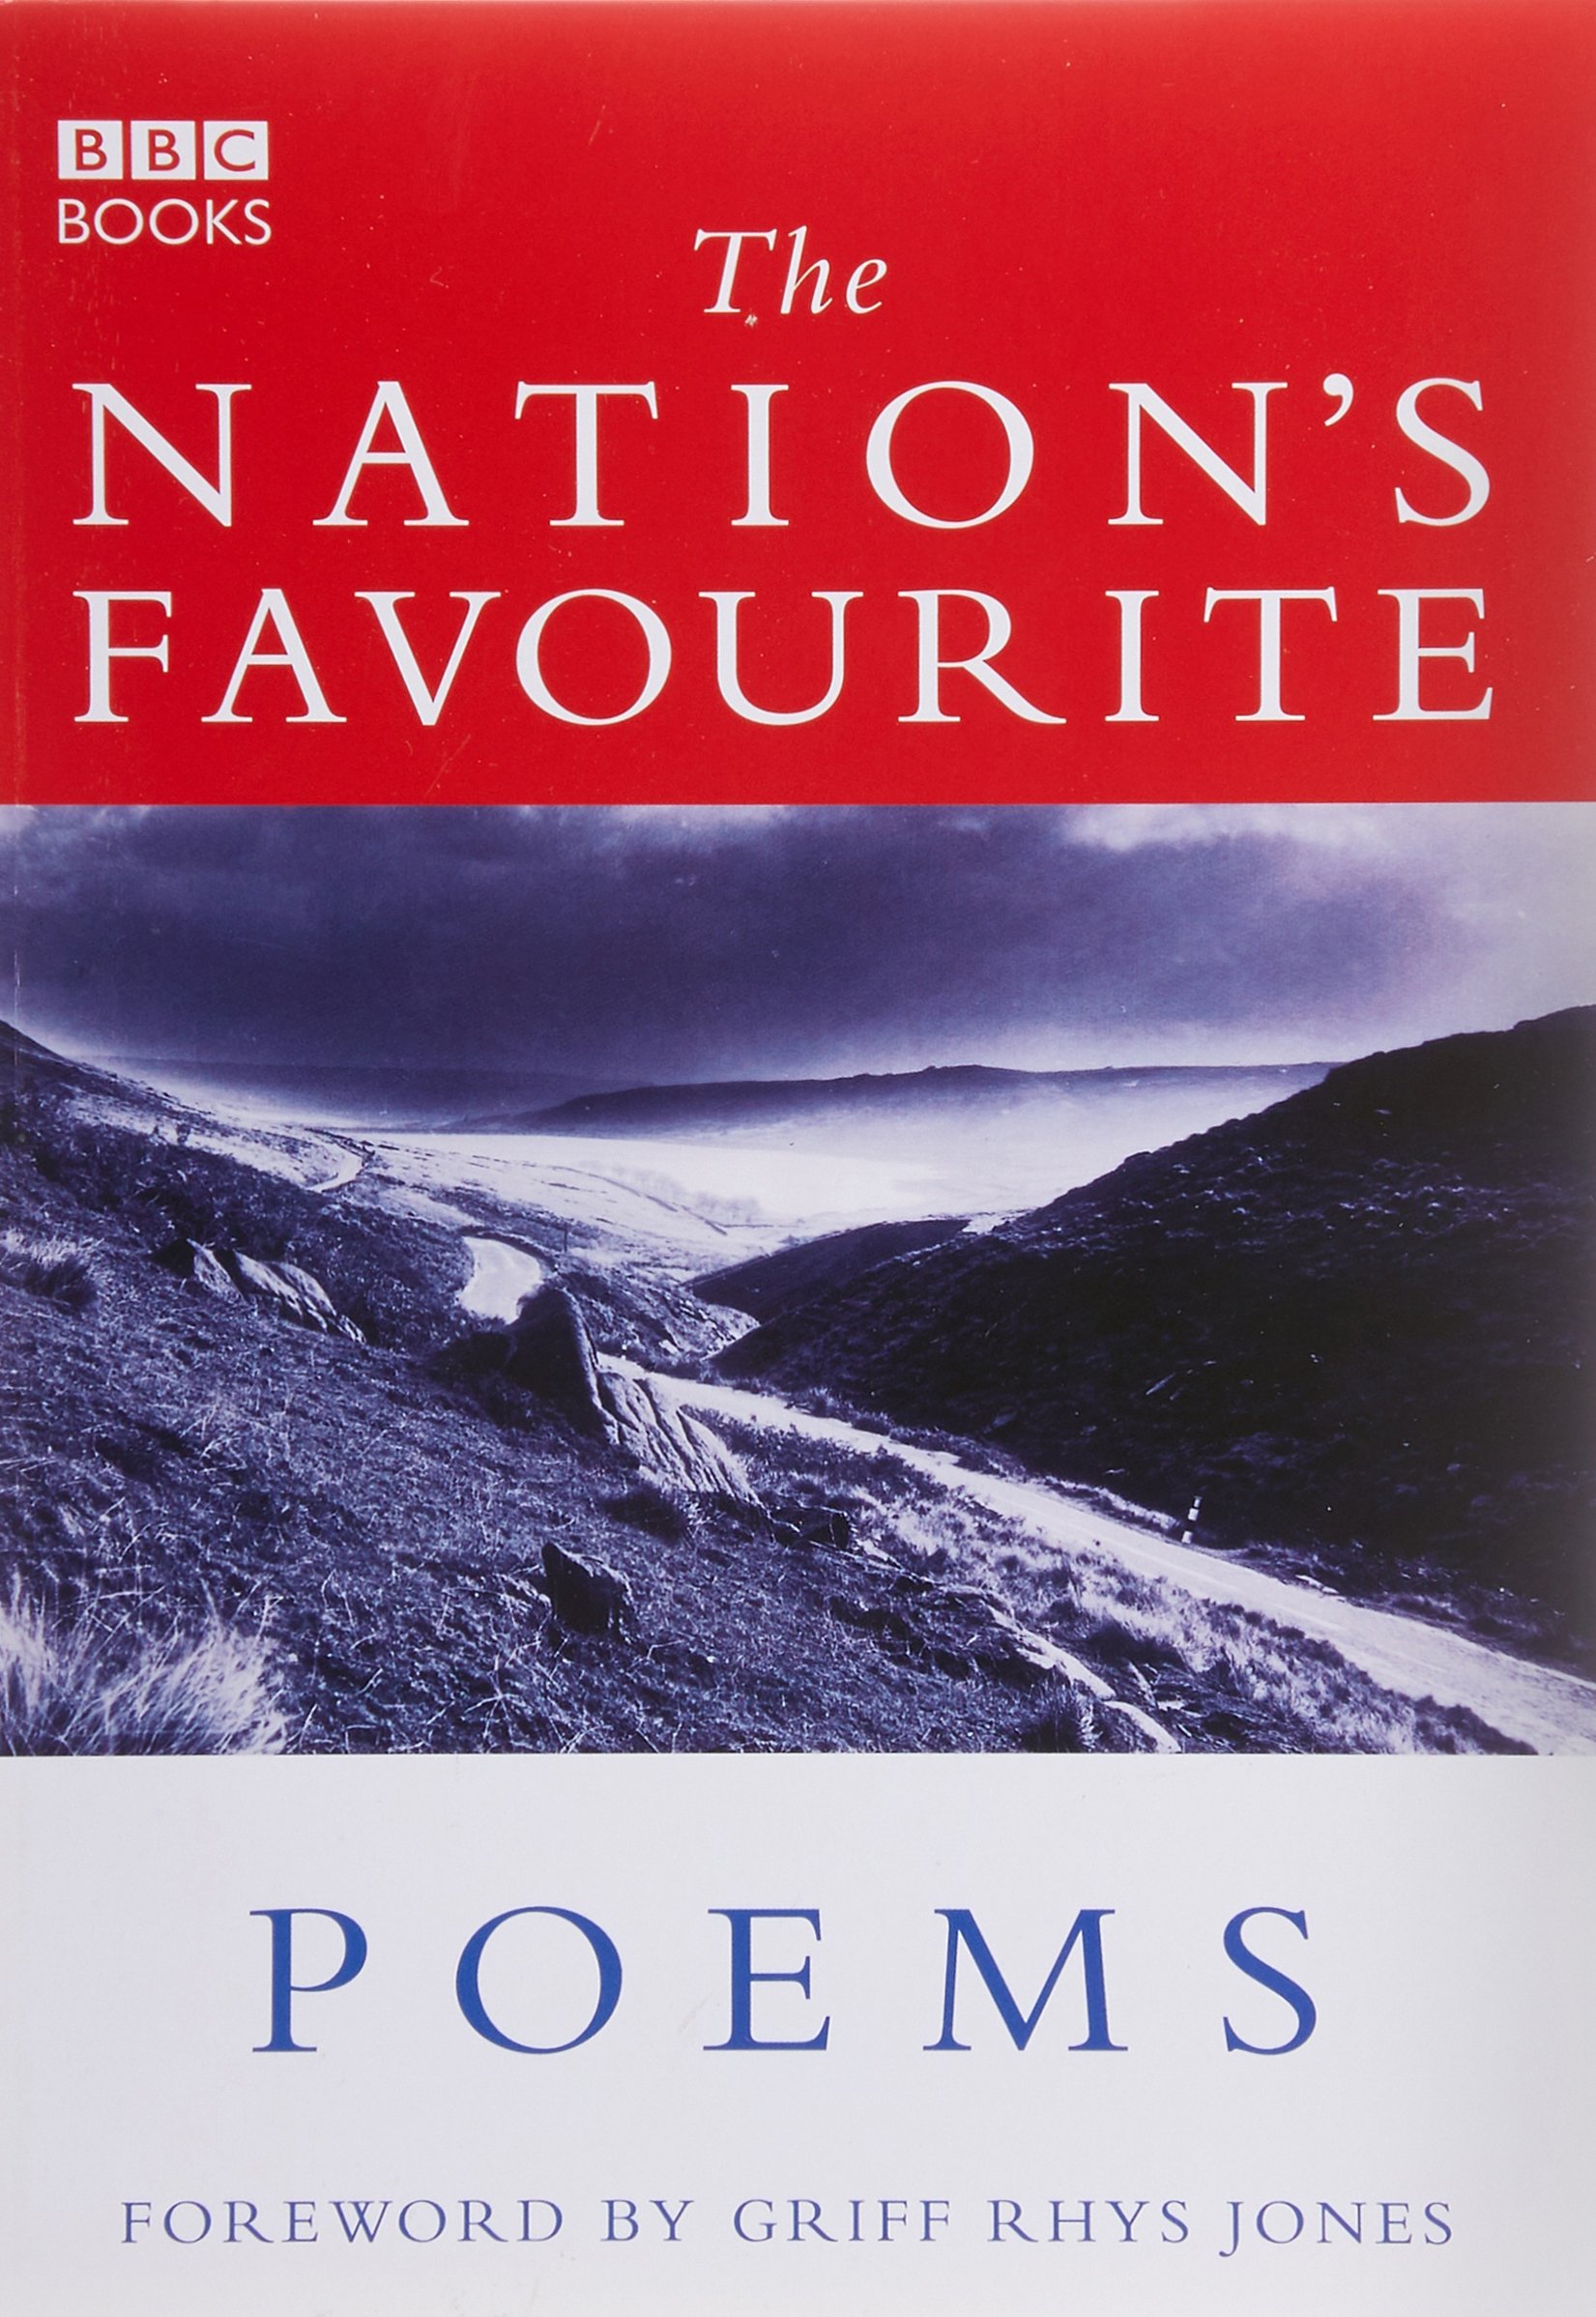 The nation's favourite poems magazine reviews